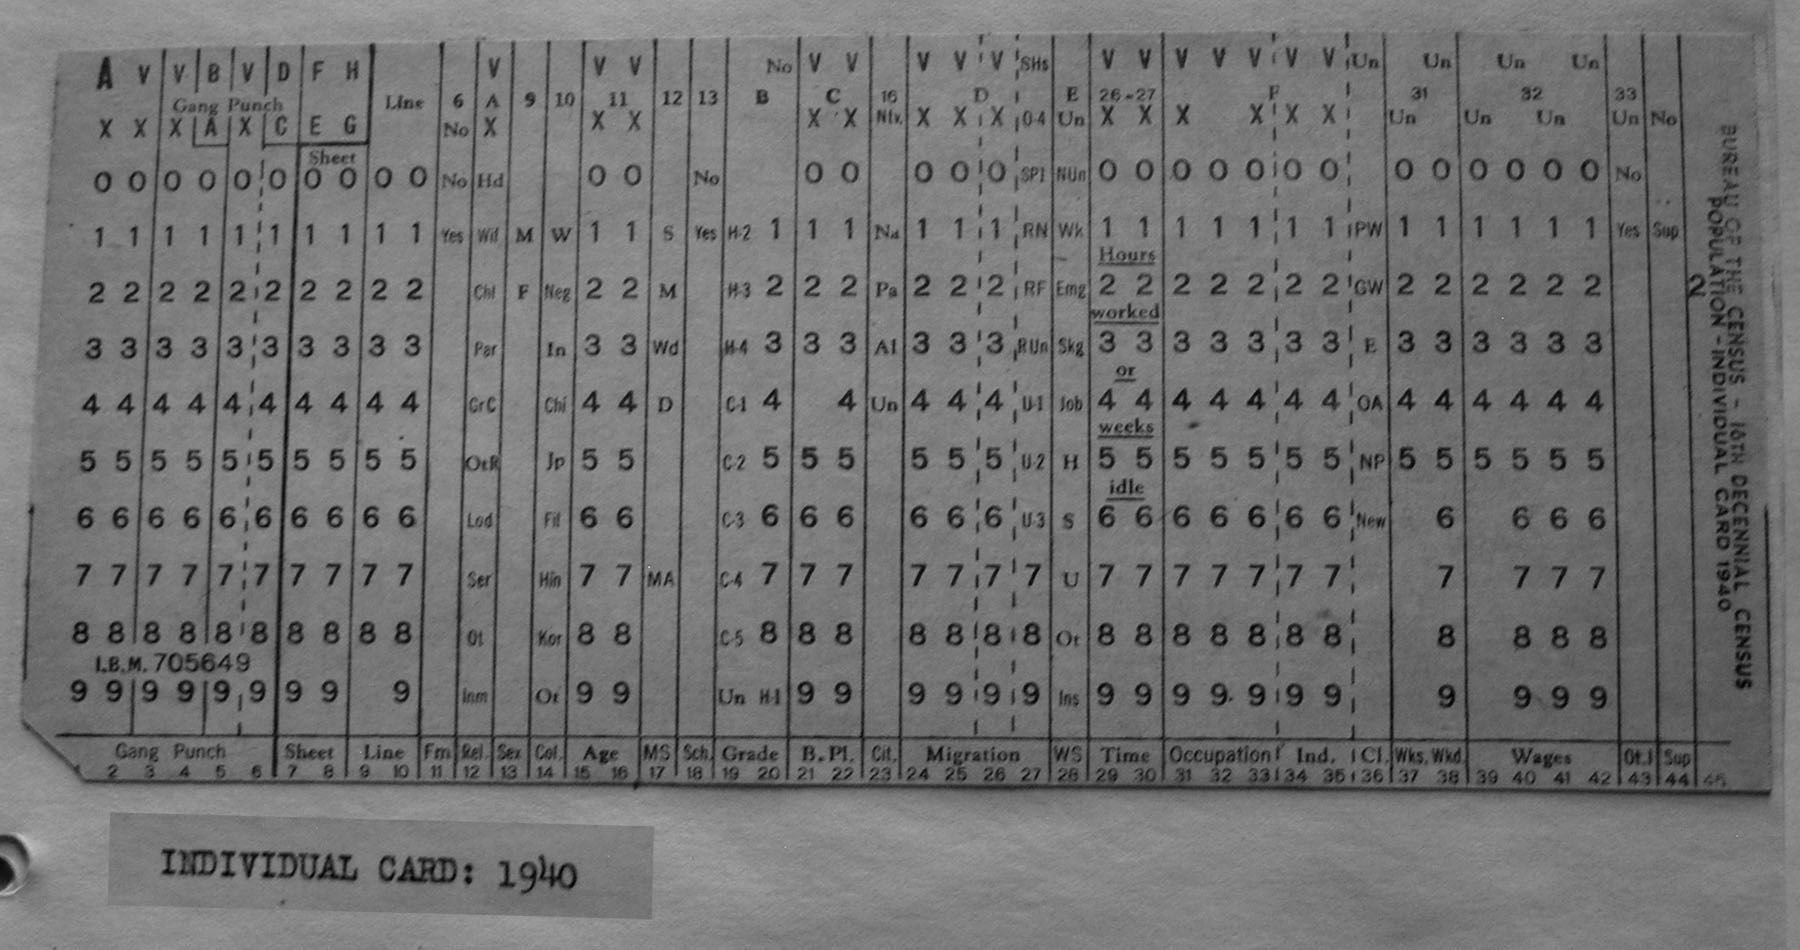 punch card for each individual in 1940 census